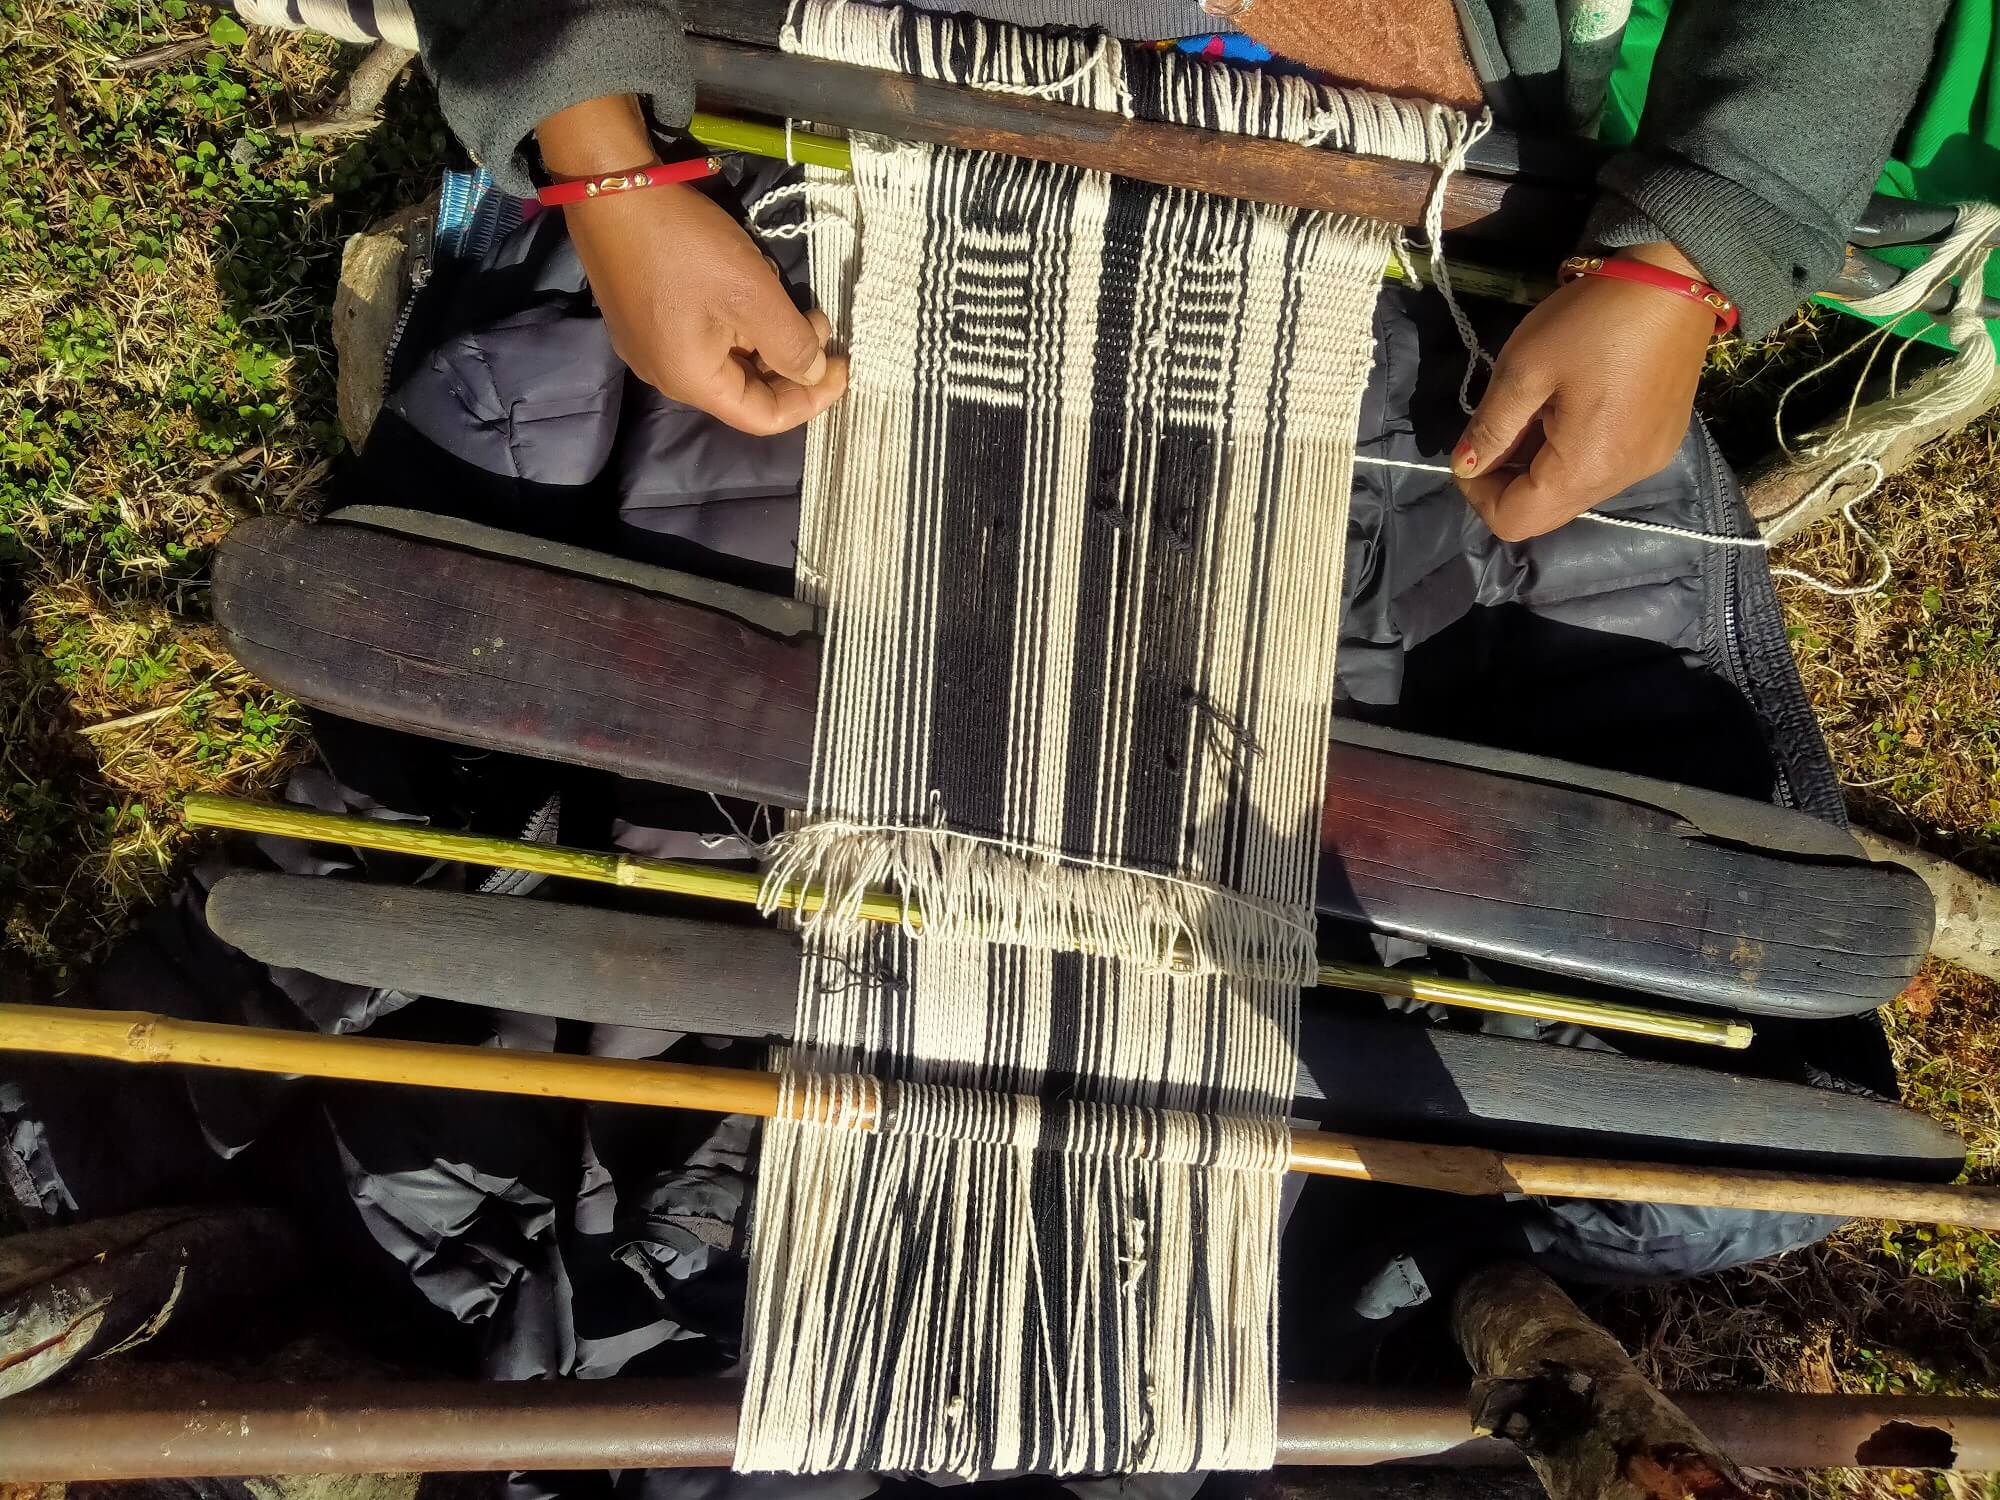 For example, the backstrap loom, a simple device made with ropes, sticks and a strap worn around the waist, had fallen out of use, despite its ability to make practical textiles for everyday use. Photo by Bina Nitwal